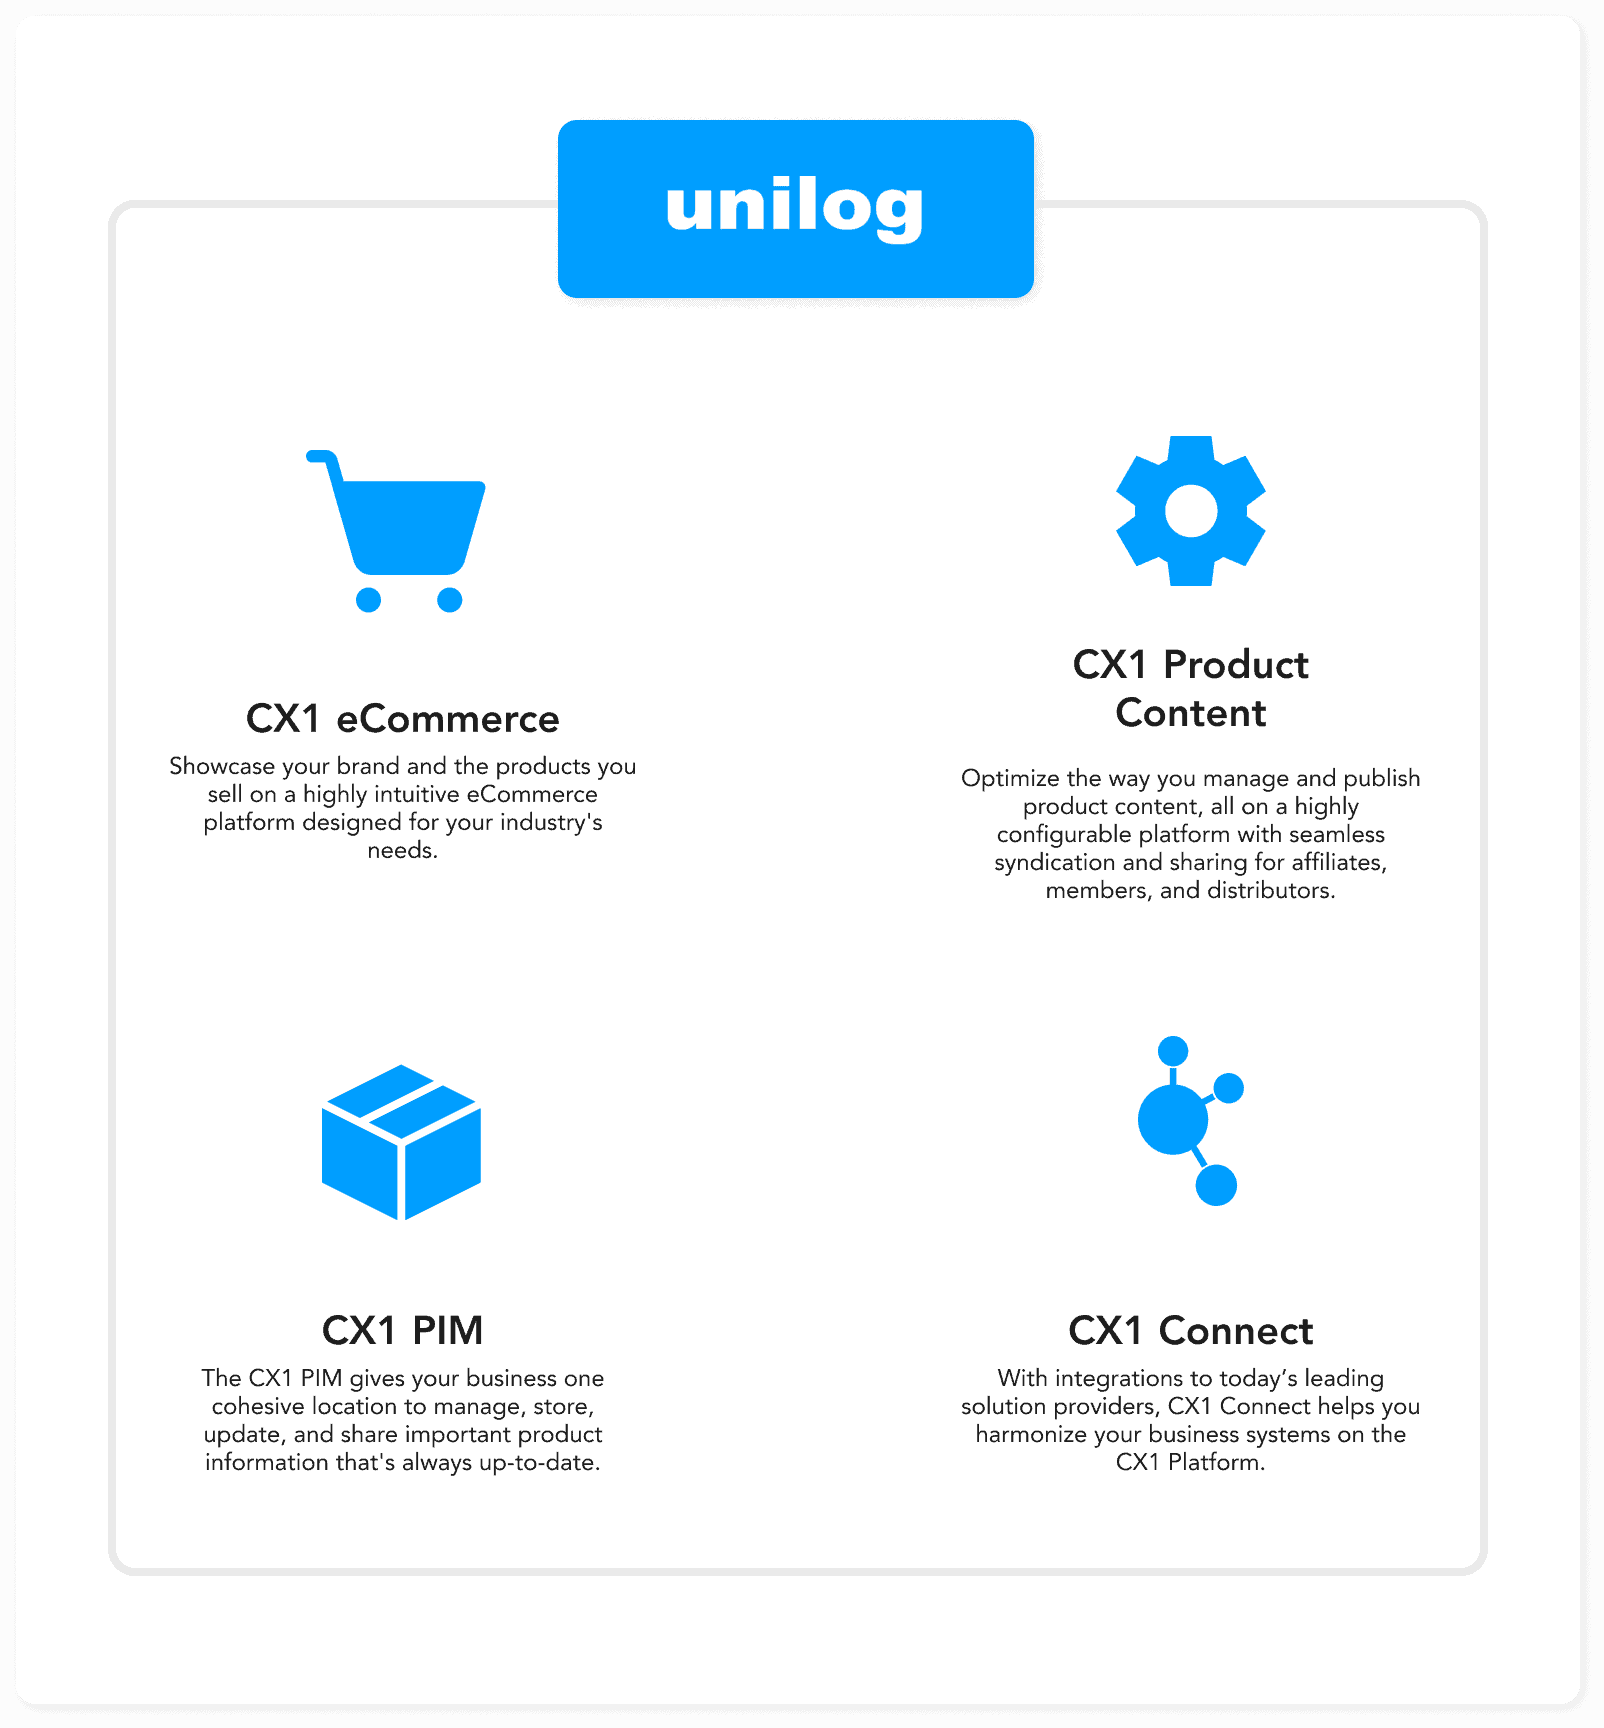 Graphic featuring the three core Unilog CX1 platform features: eCommerce, Product Content, PIM, and Connect